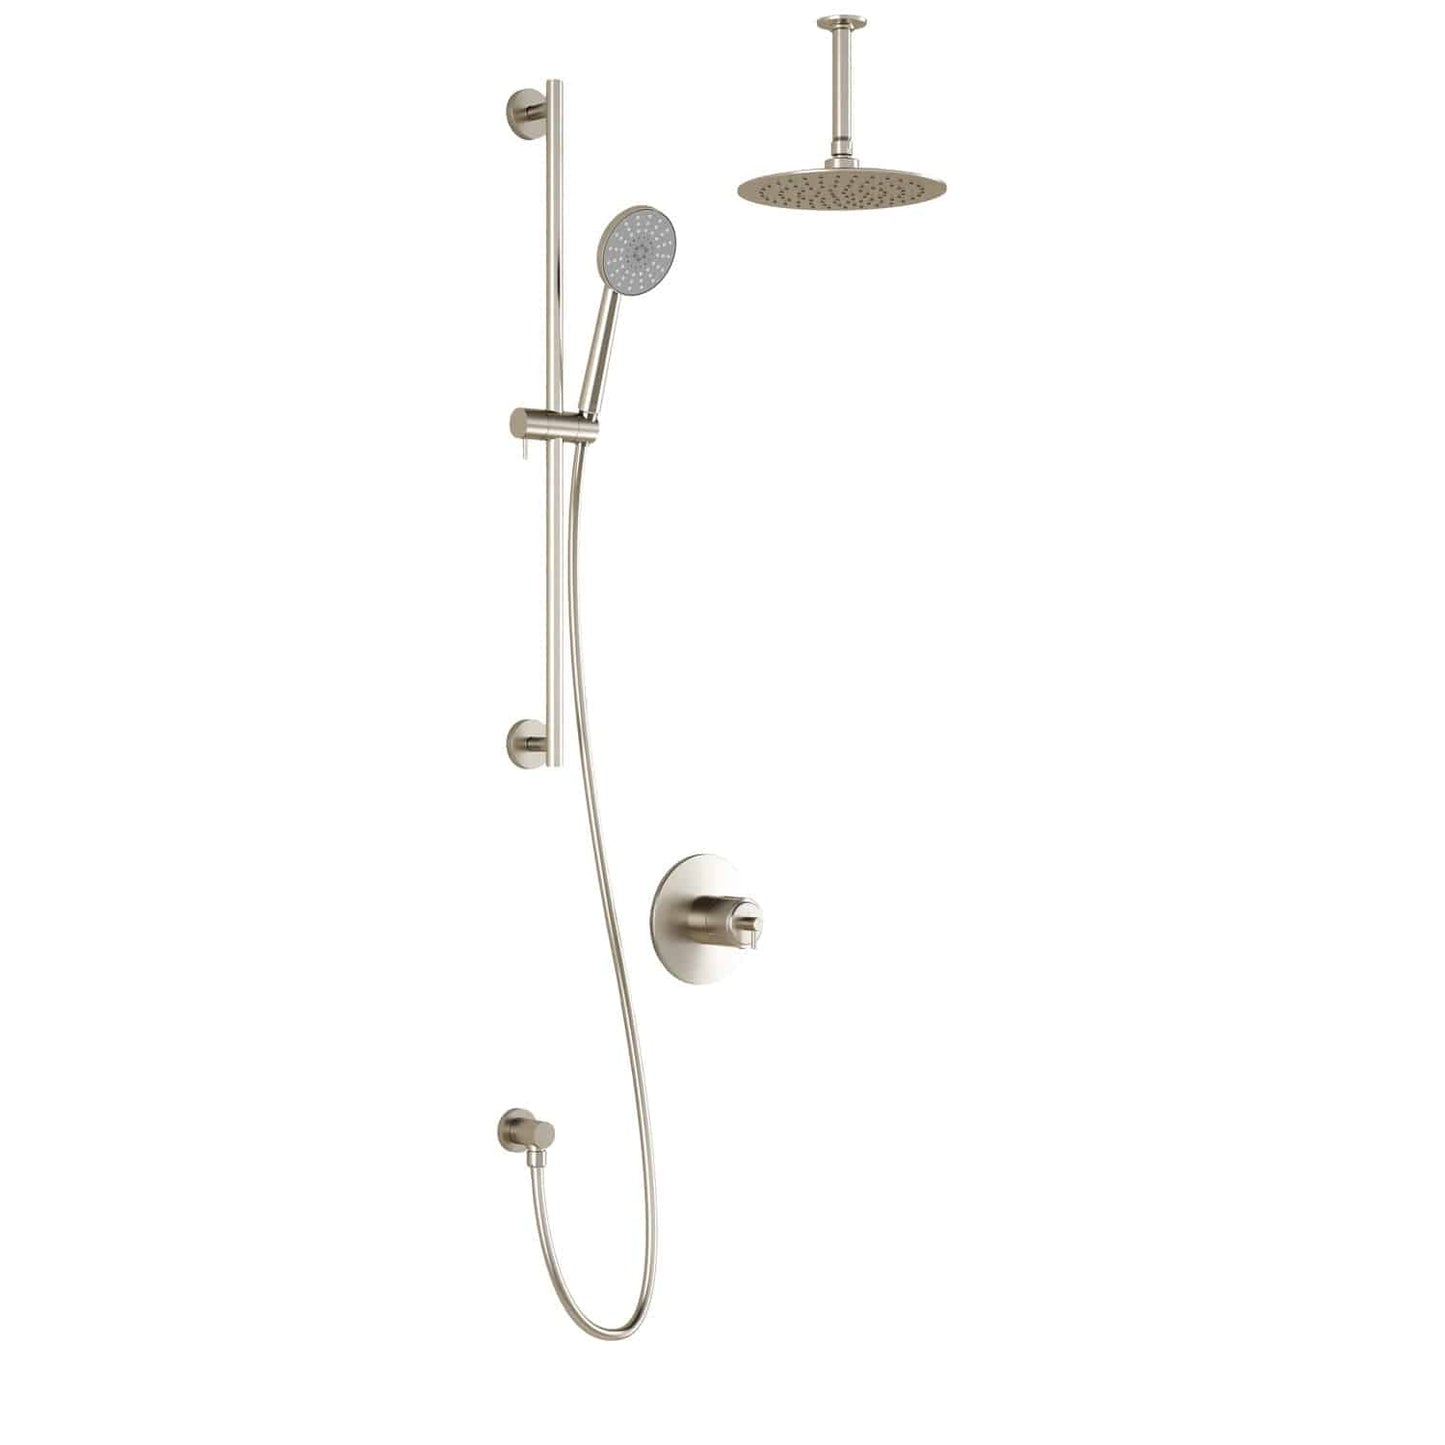 Kalia CITÉ TCD1 : AQUATONIK T/P Coaxial Shower System with Vertical Ceiling Arm Brushed Nickel PVD